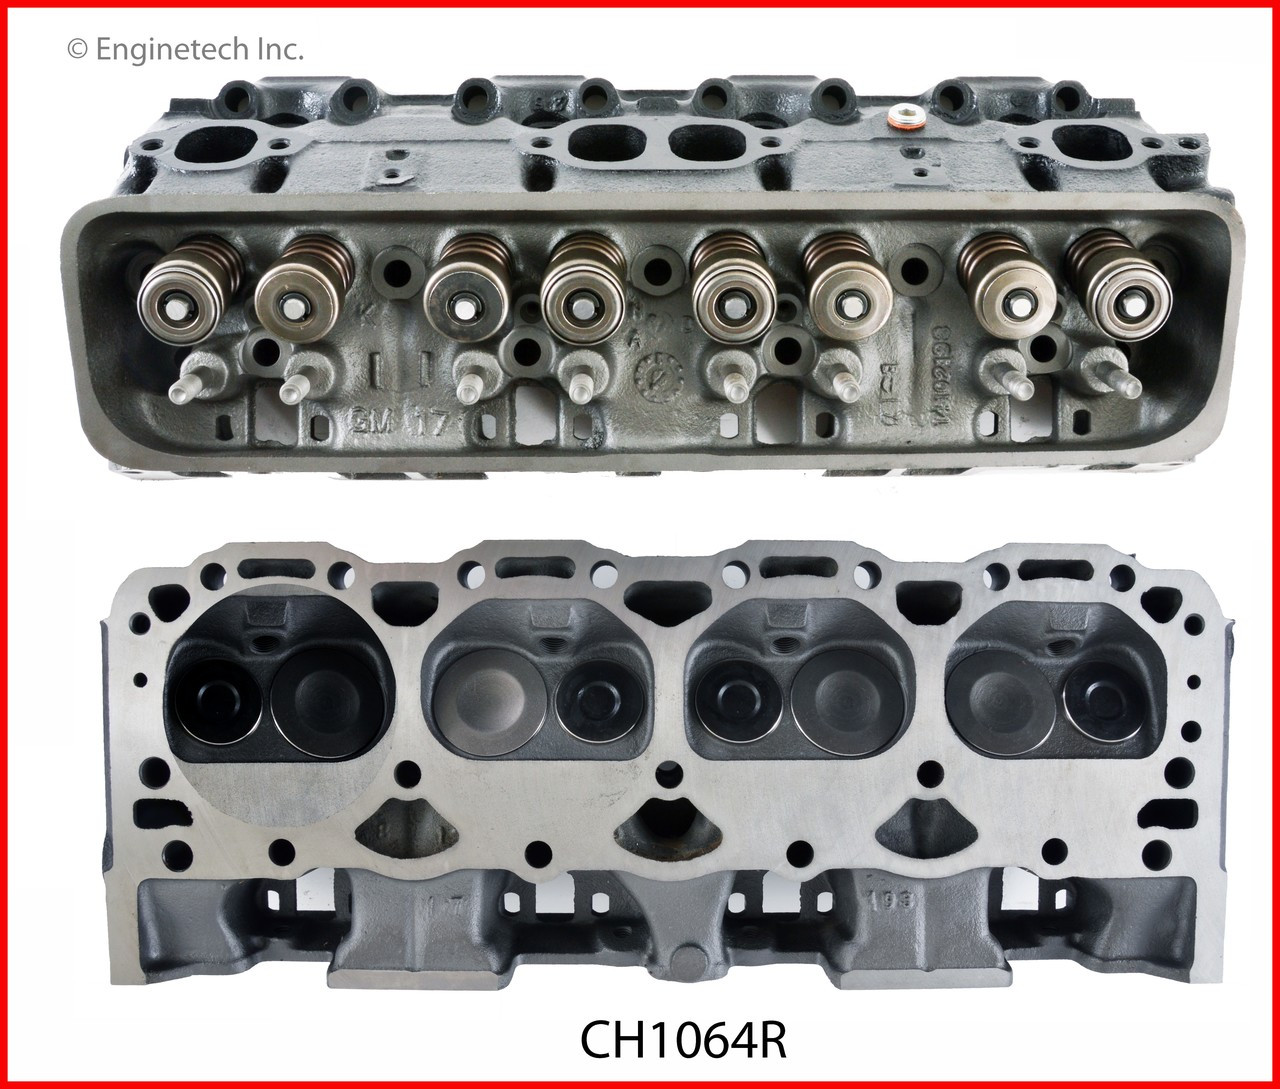 1996 Chevrolet Express 1500 5.7L Engine Cylinder Head Assembly CH1064R -291